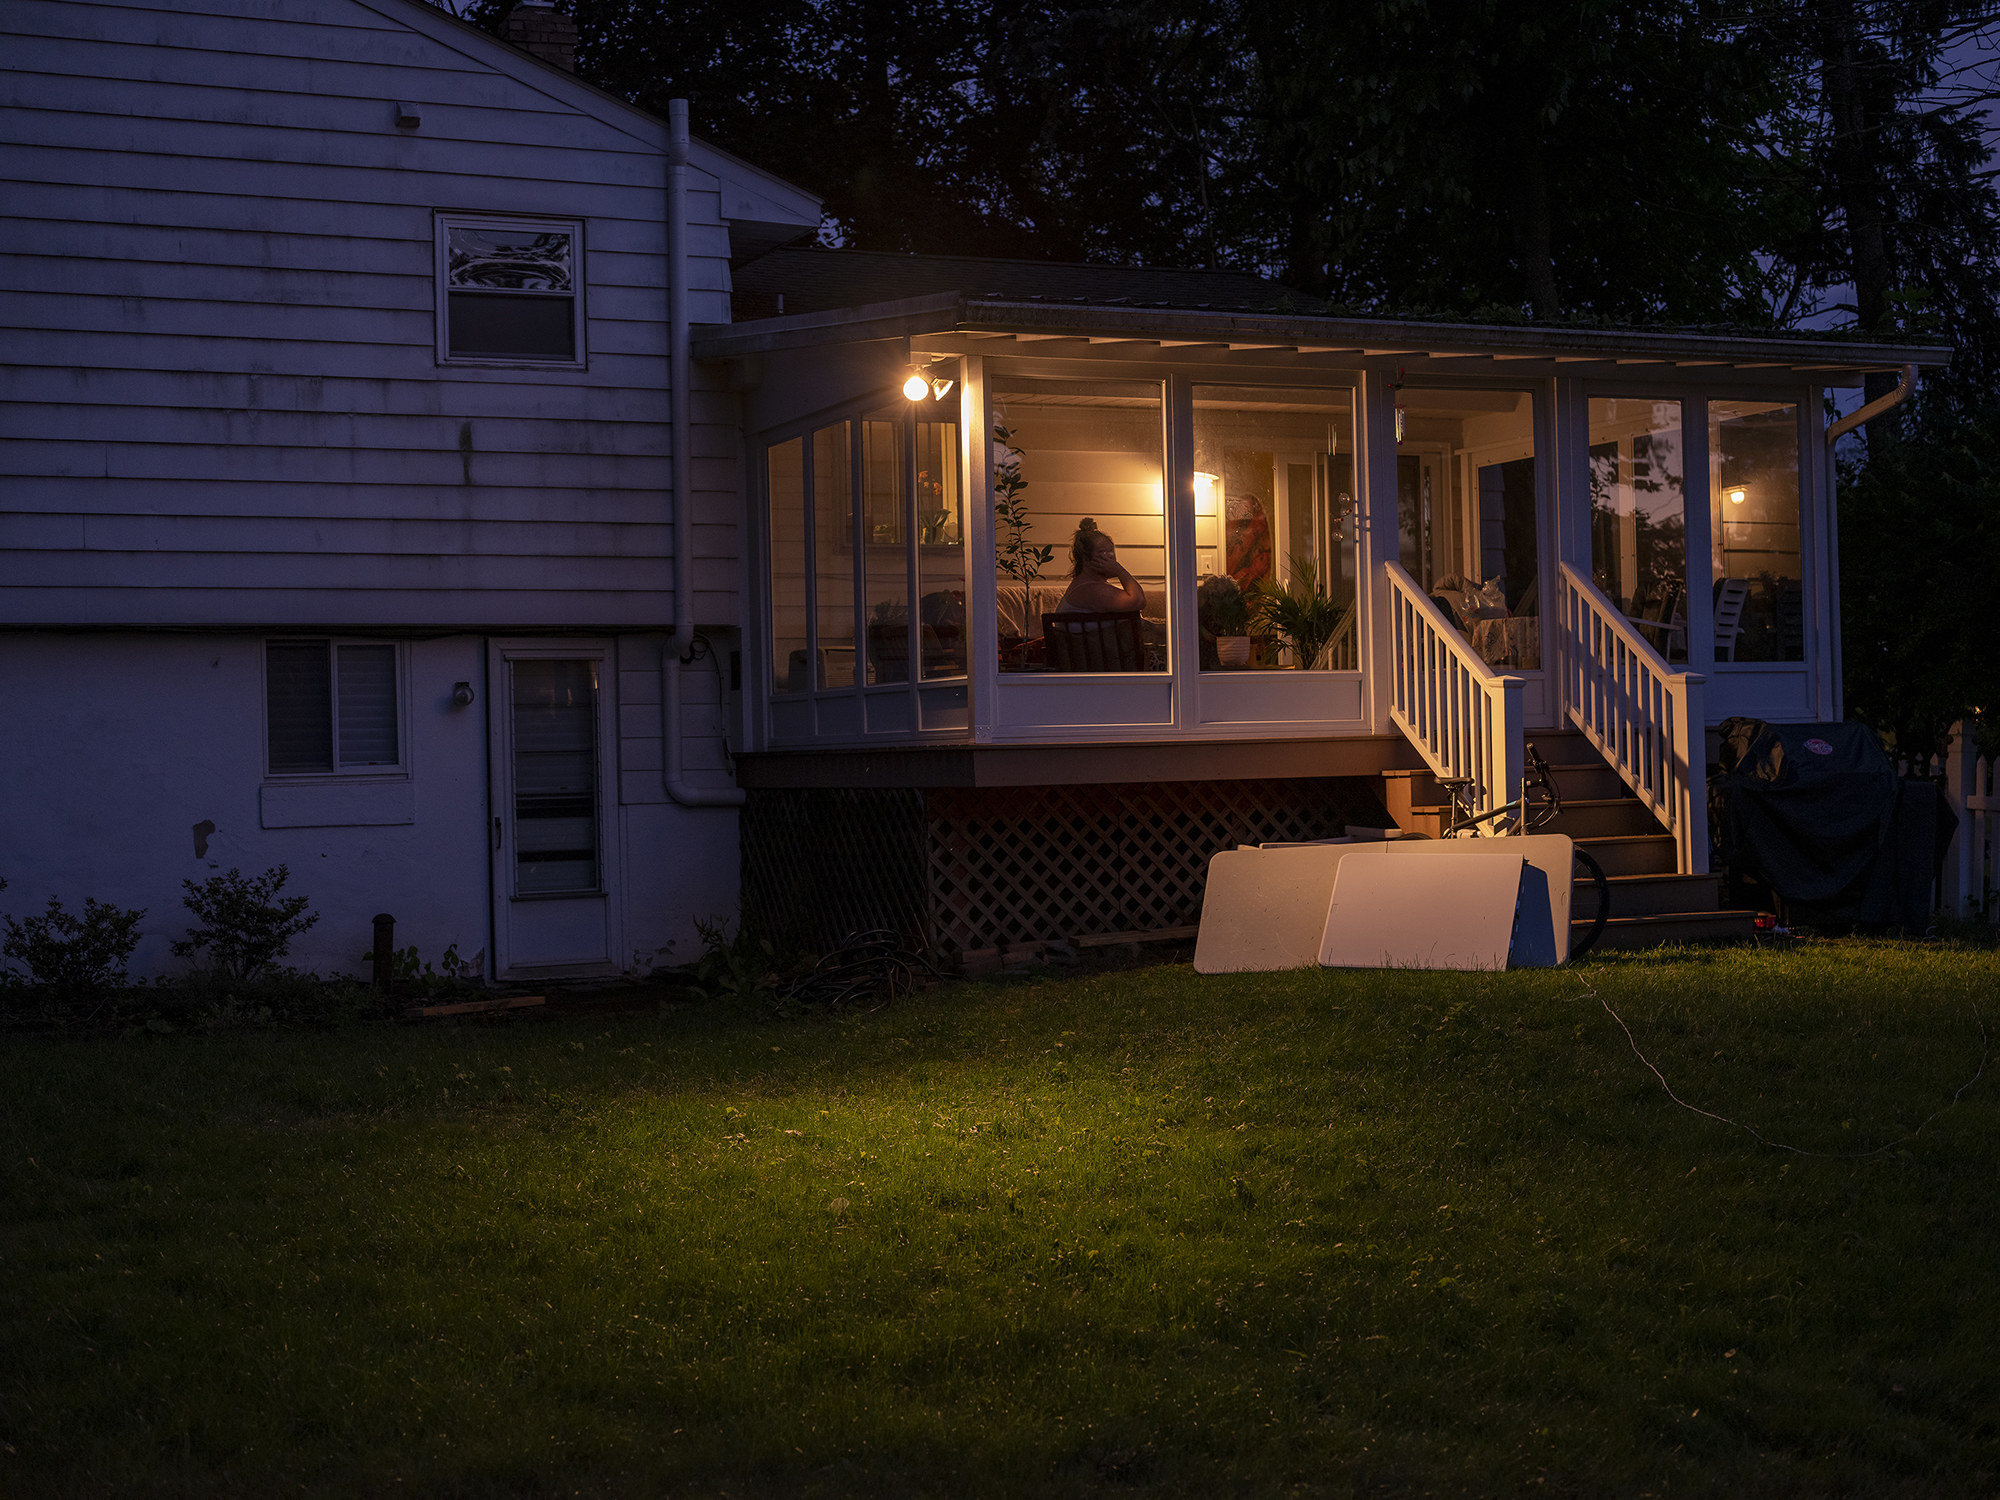 A shot of a person sitting in a glass enclosed porch behind their home, with a porch light on 